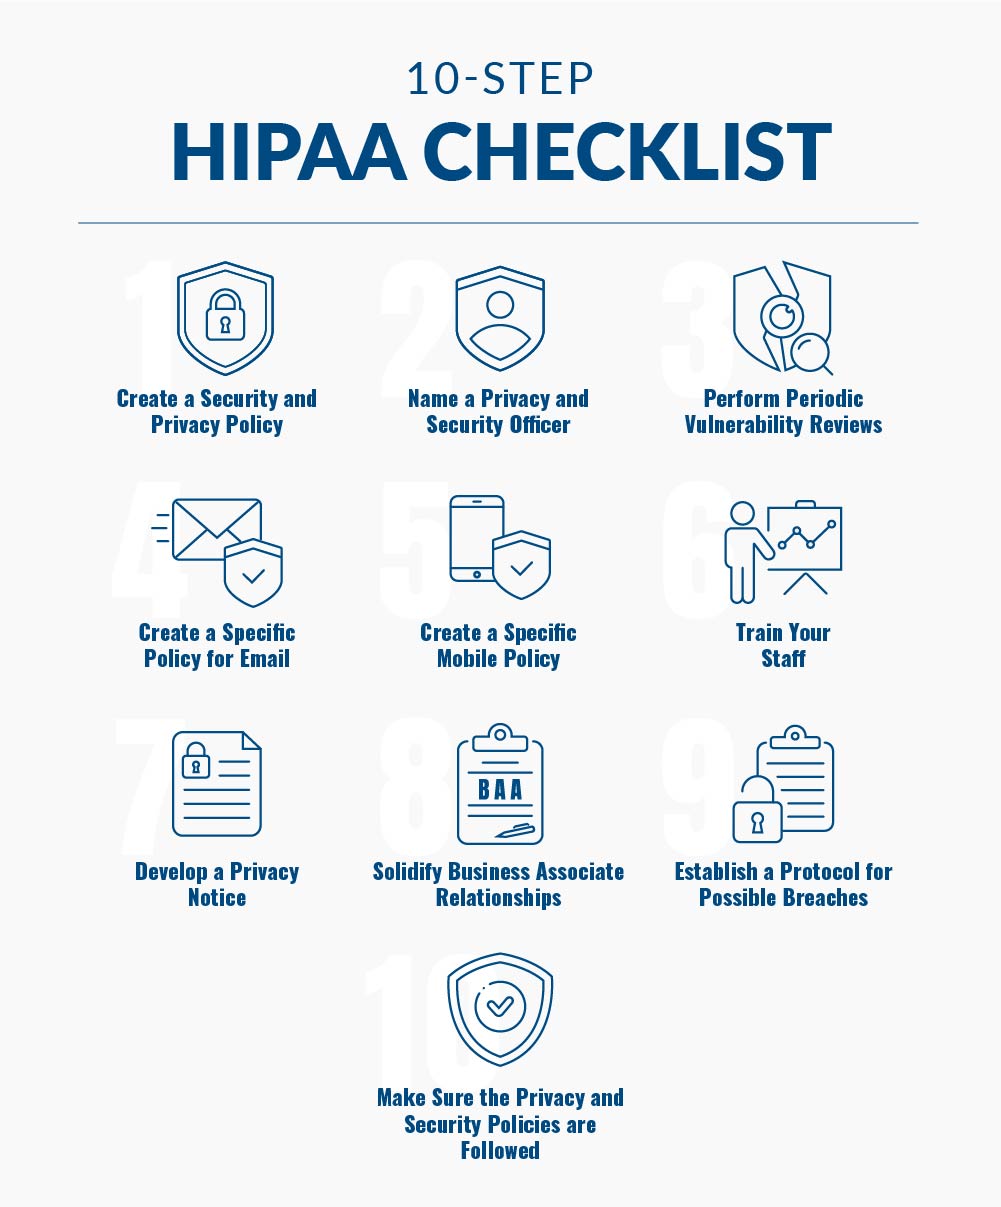 How to Become HIPAA Compliant: The 10 Step Guide from HIPAA Experts